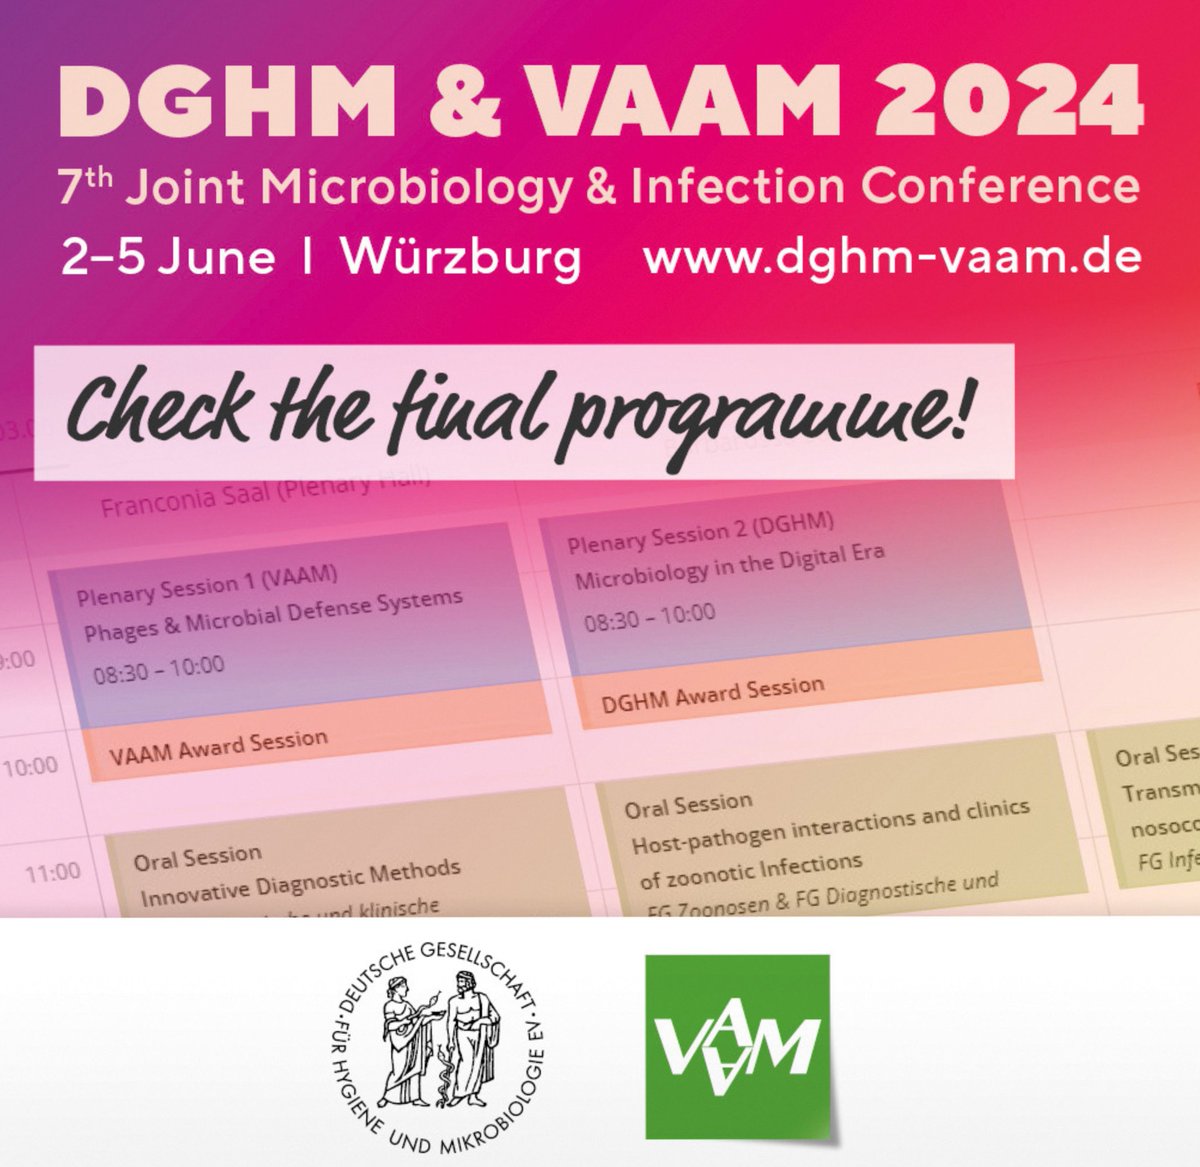 Are you coming to Würzburg for #DGHMVAAM2024? Take a look at the program and pick your personal highlights 🌟🦠🍄🧫🌟 🖱Plan your conference visit: t1p.de/zbfd4 #dghmvaam2024 #VAAM #DGHM #hygiene #mikrobiologie #microbiology #infectionmedicine #microbes